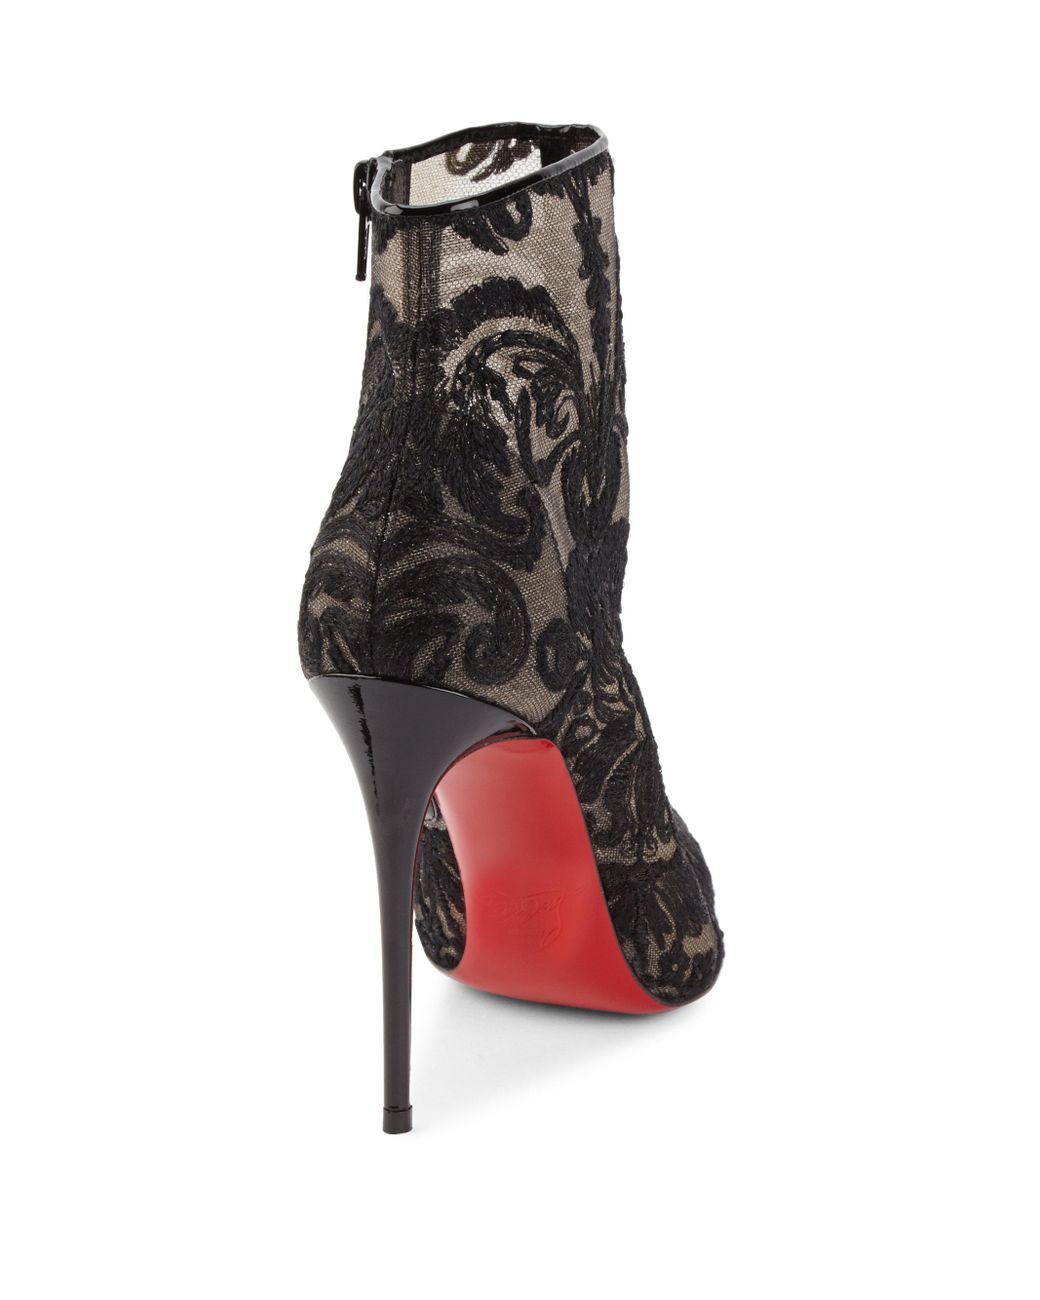 Christian Louboutin Gipsy 100 Guipure Lace Ankle Boots in Black